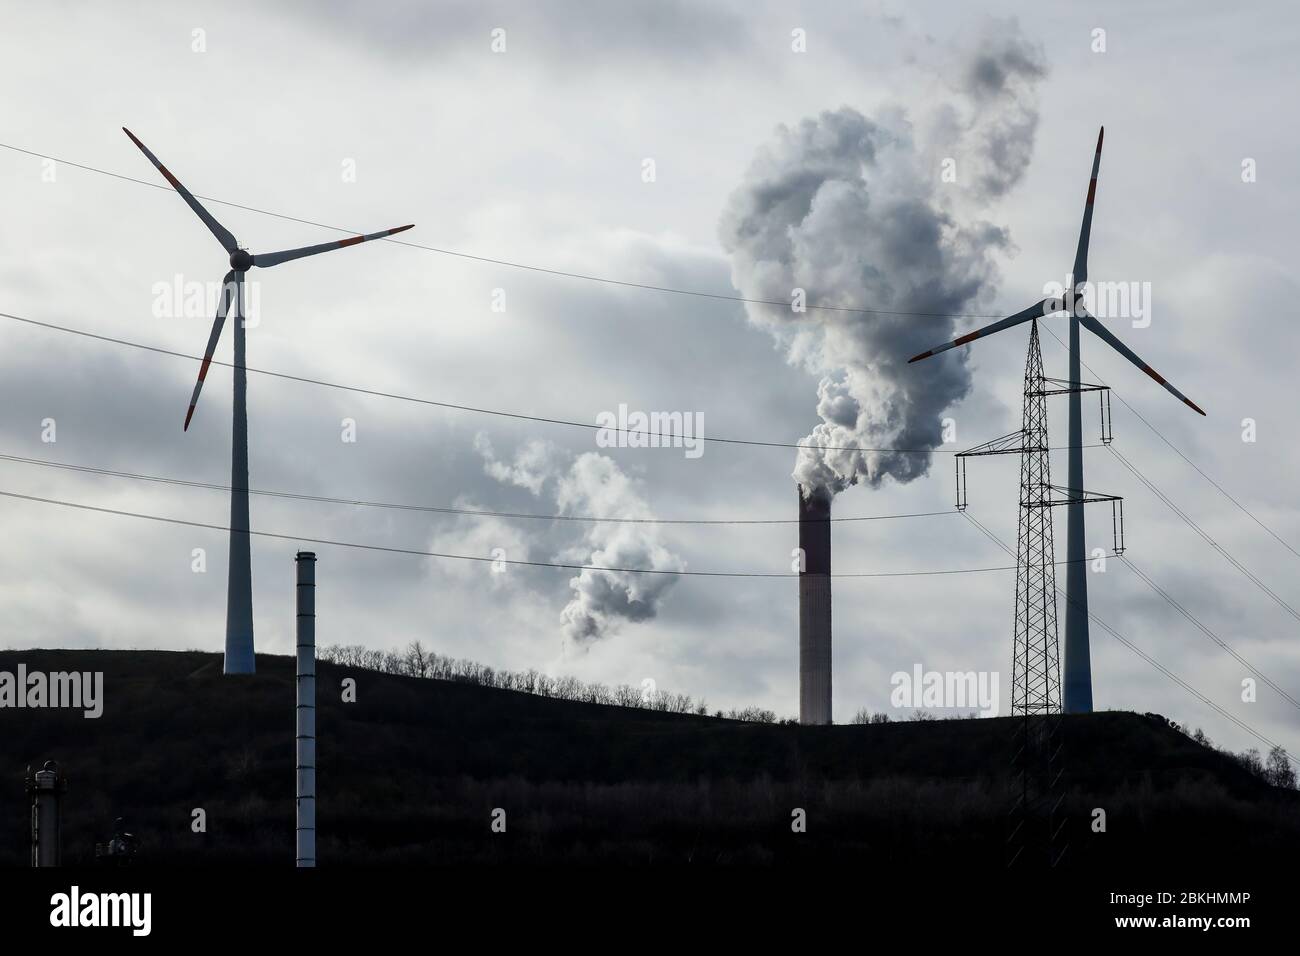 Gelsenkirchen, Ruhr Area, North Rhine-Westphalia, Germany - energy landscape, wind turbines, power pole and smoking chimneys at the Scholven power pla Stock Photo